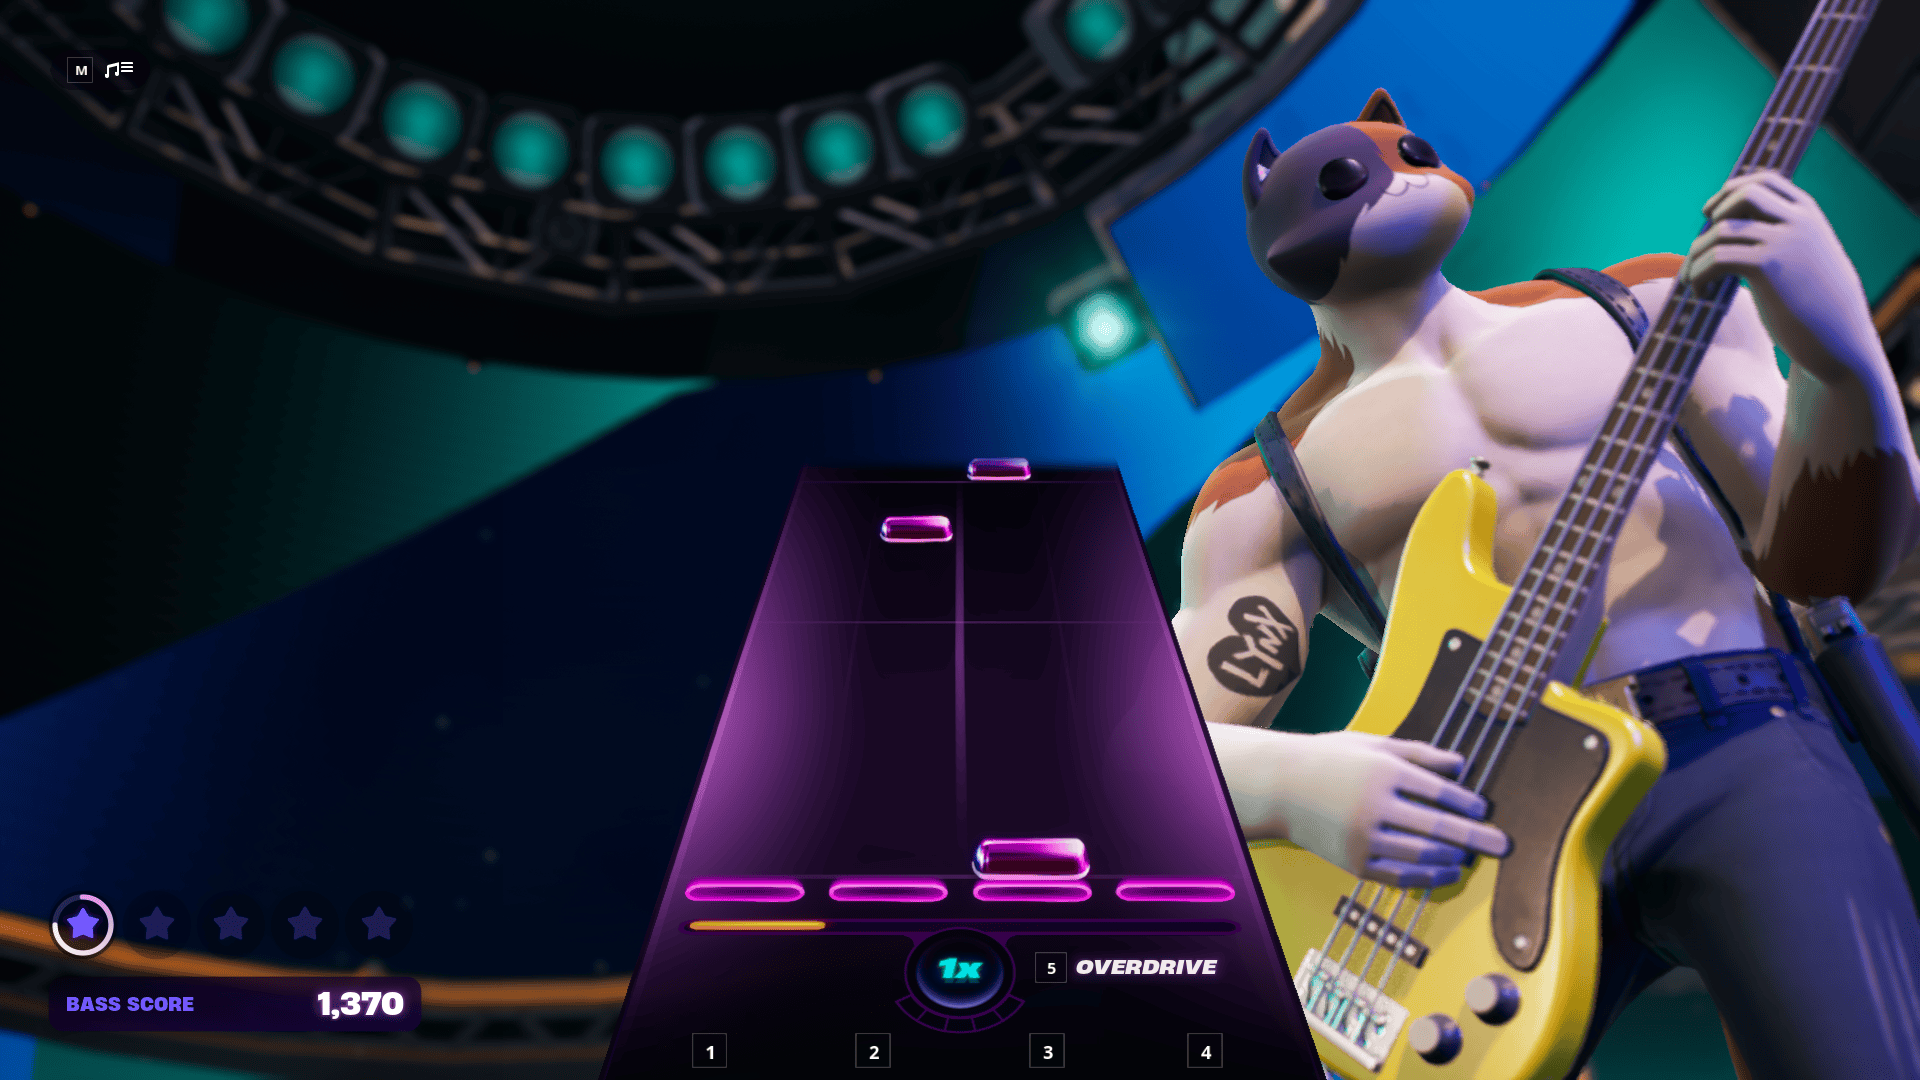 A screenshot of Fortnite's "Fortnite Festival" mode: the character Meowscles, a muscular brown, white, and gray calico, plays a yellow bass guitar. There is a purple track with buttons on it indicating keys the player should press to simulate playing music.